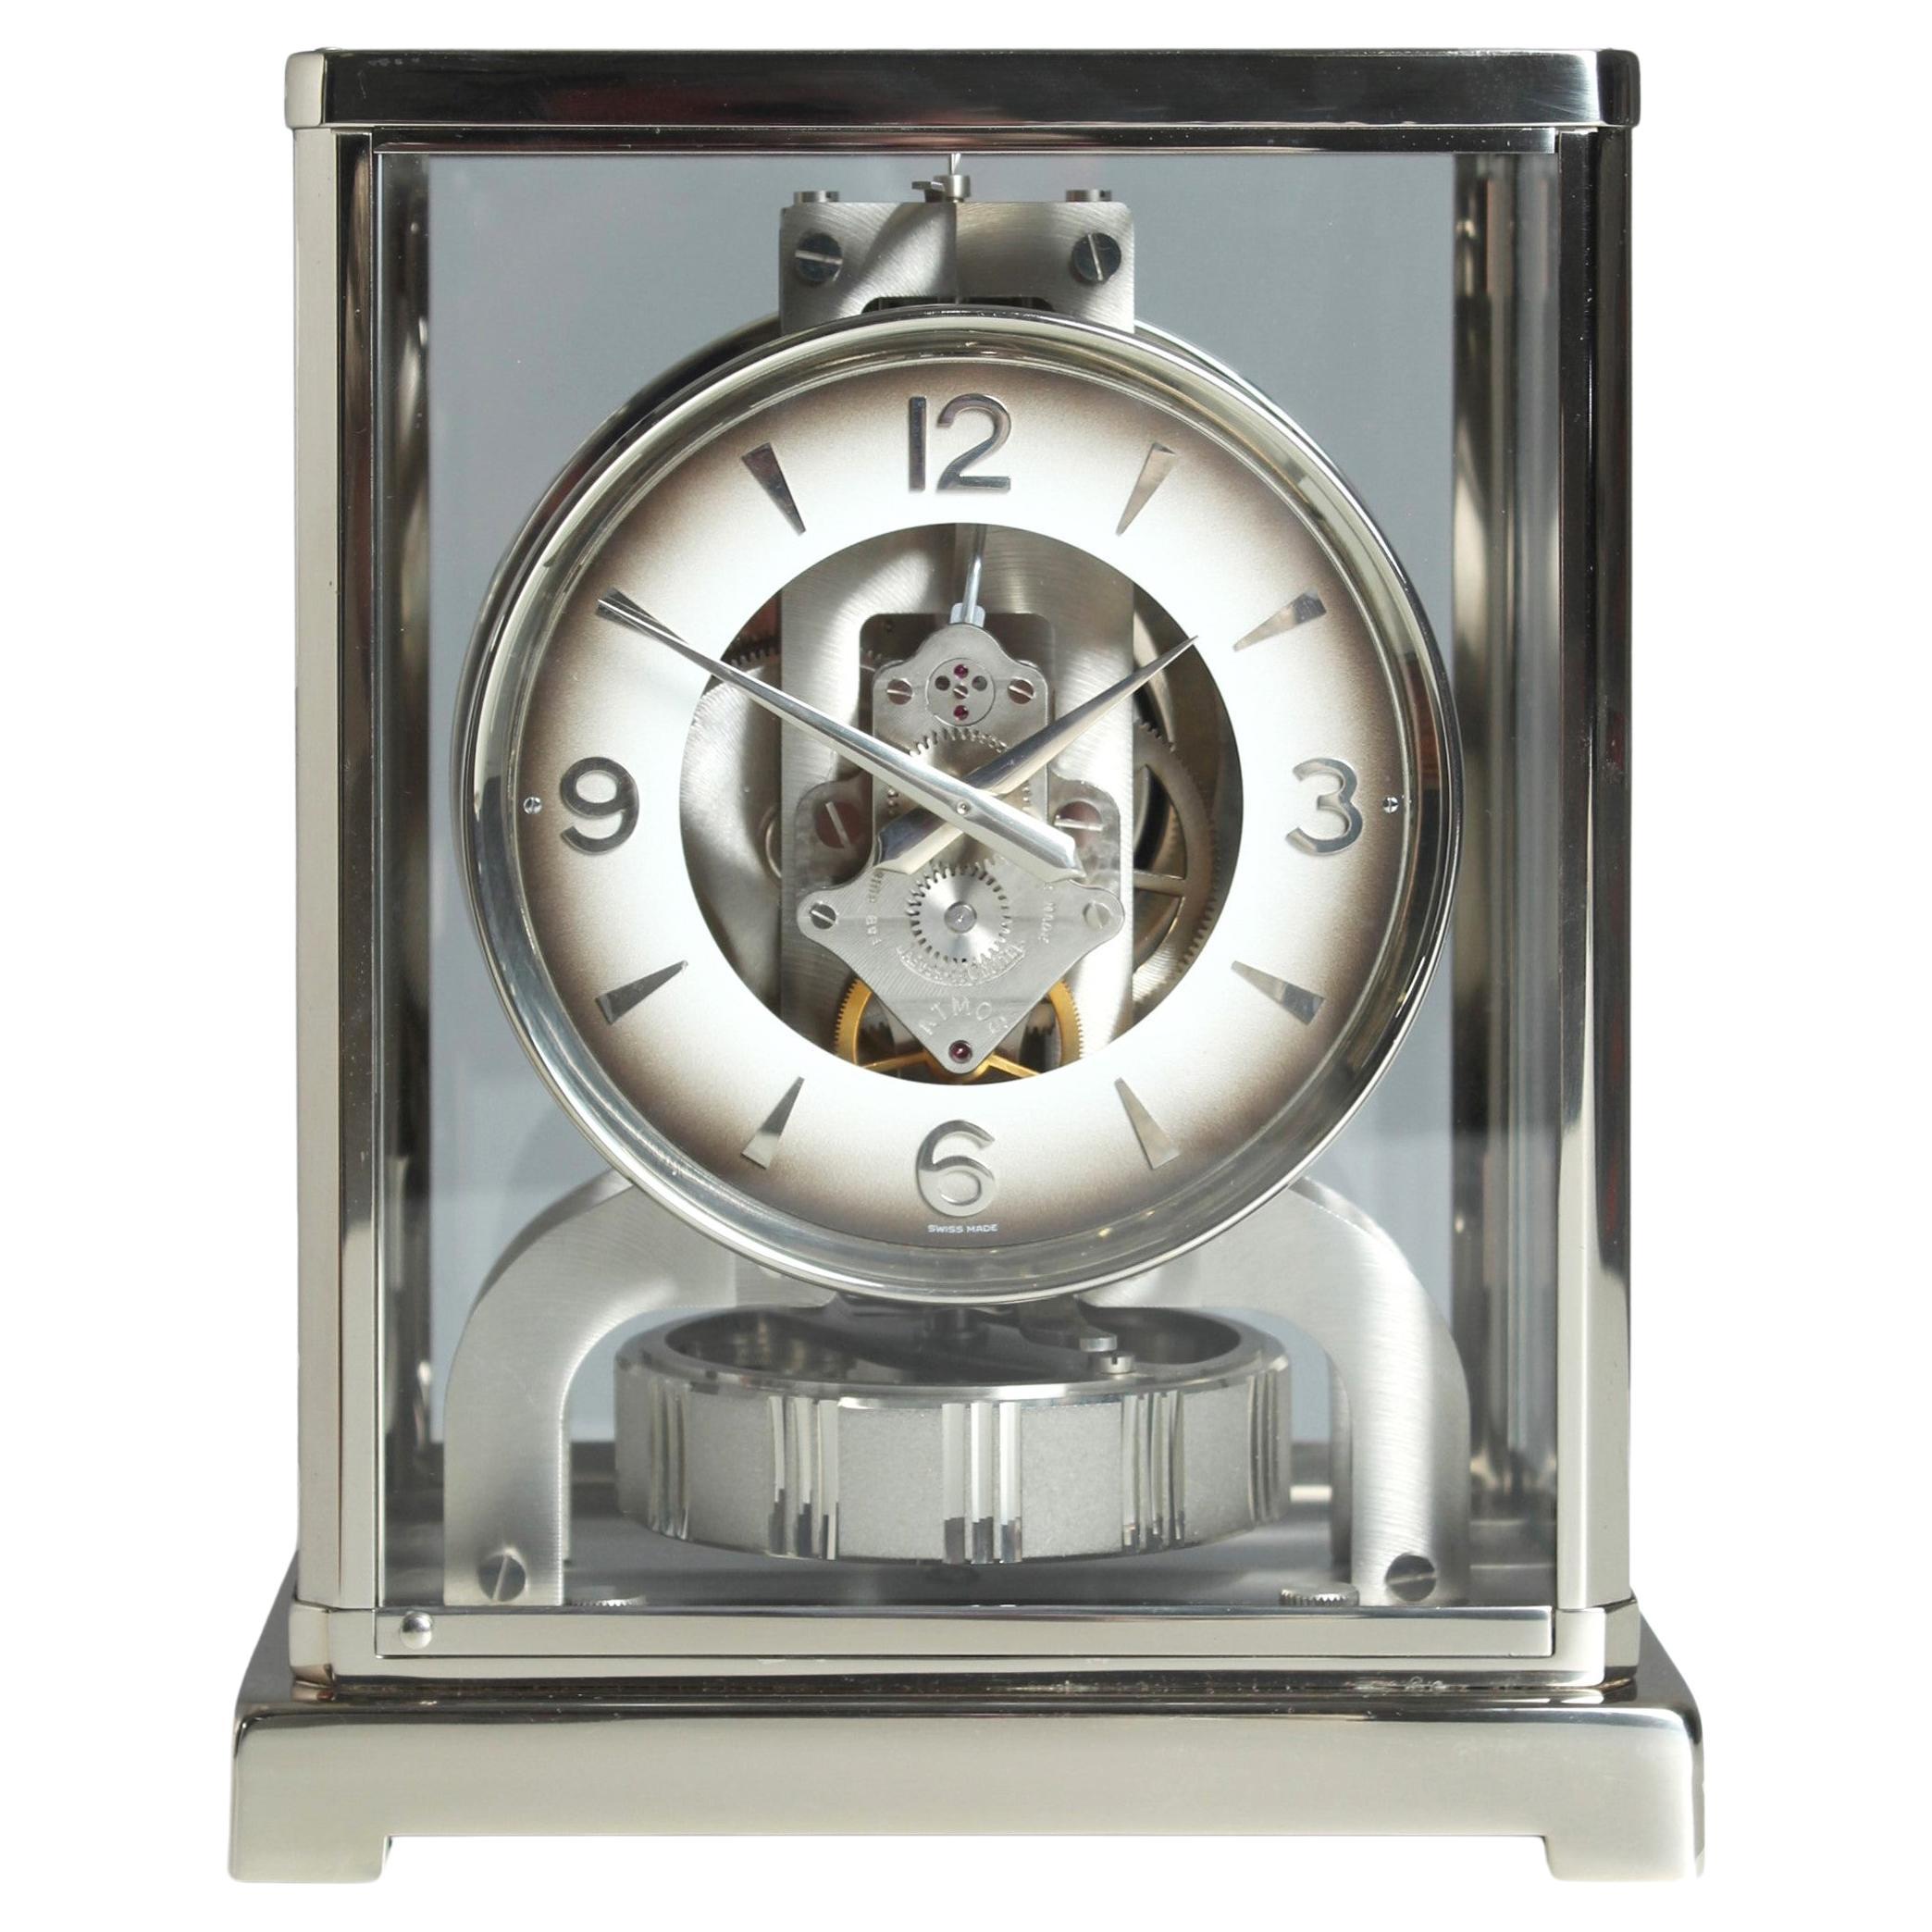 Jaeger LeCoultre, Silver Atmos Clock, Original Nickel Plated, Swiss, 1973 For Sale